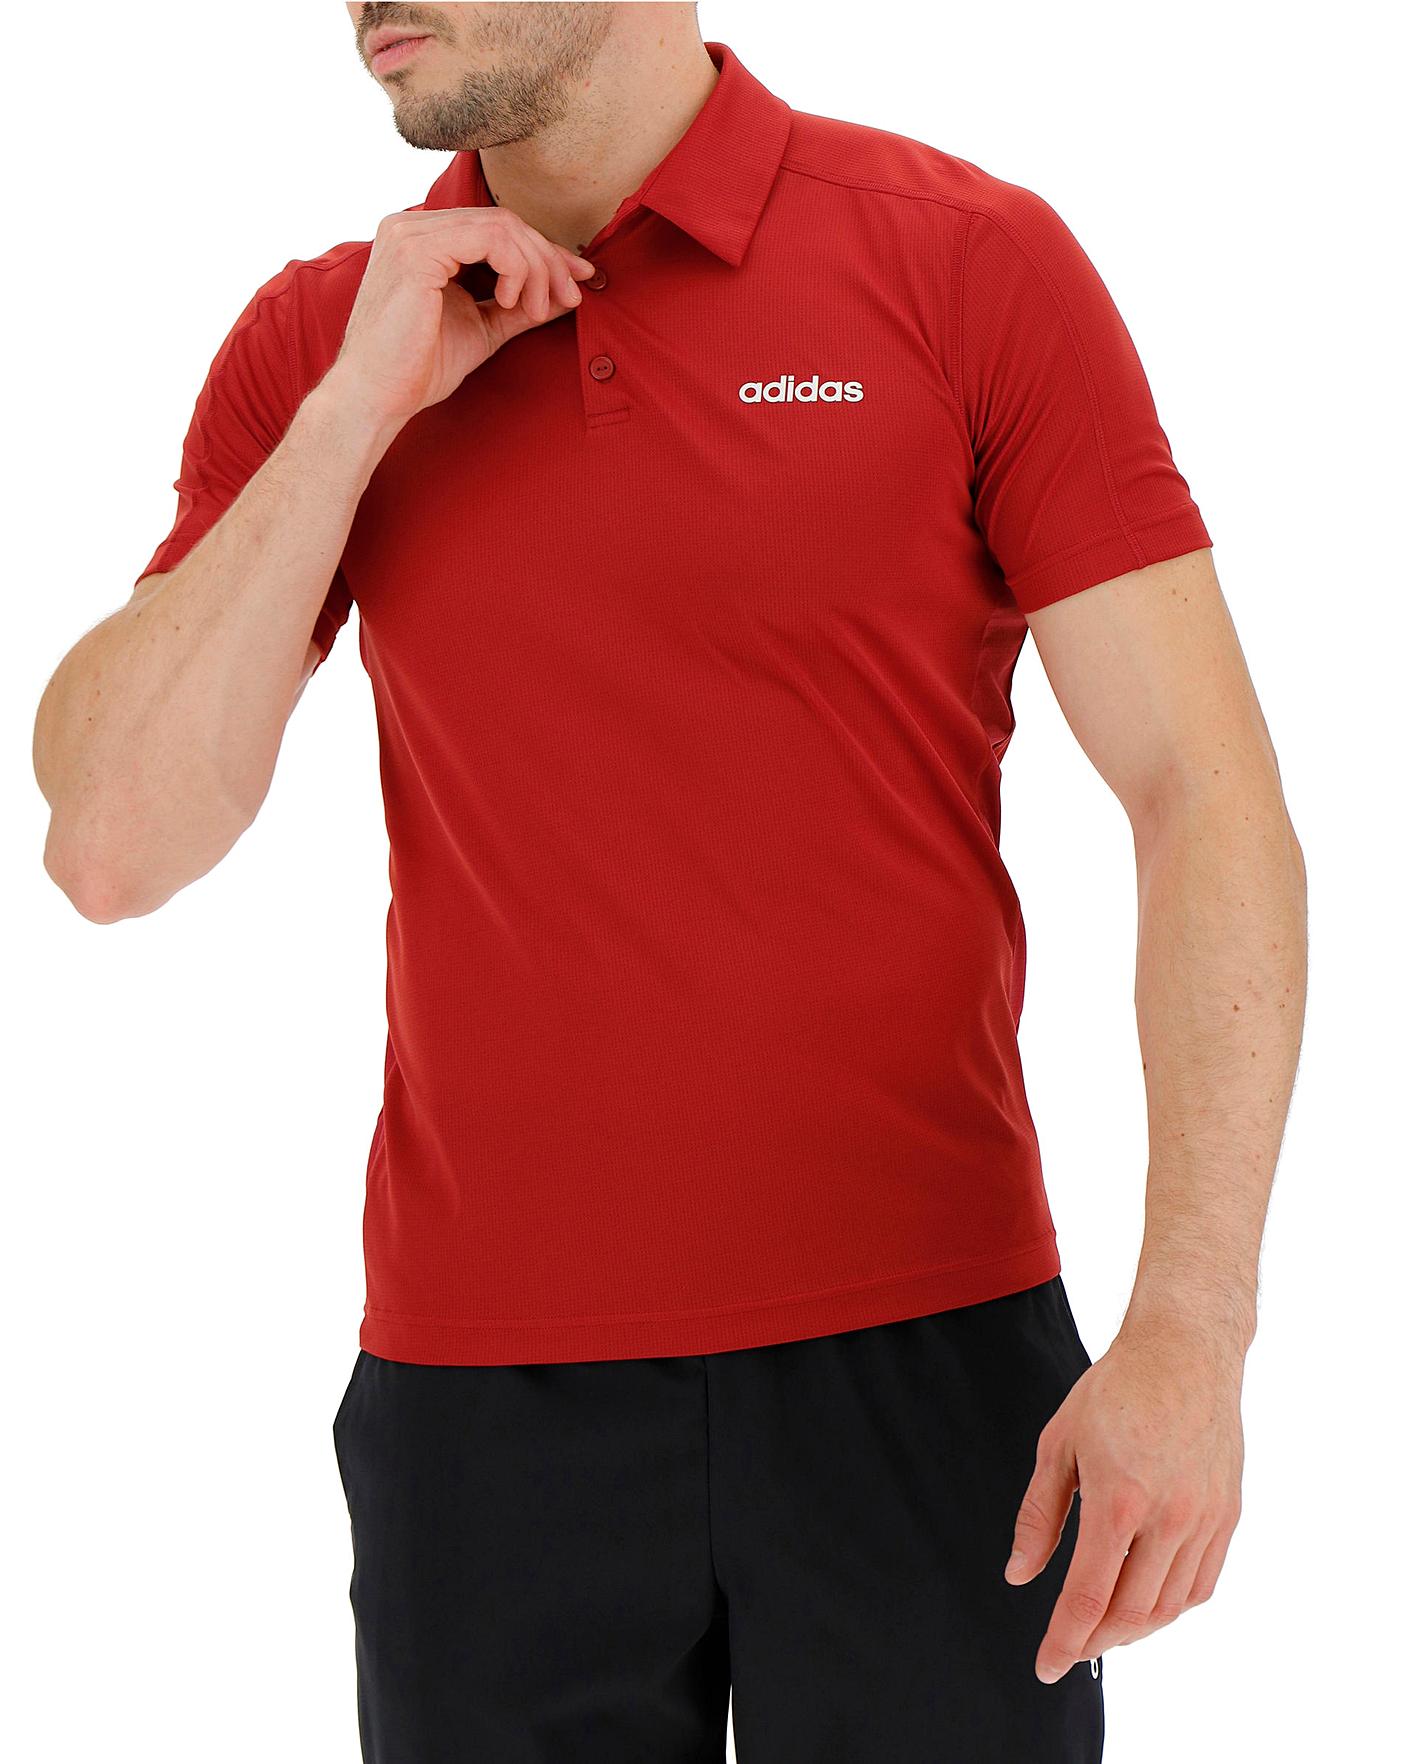 adidas climacool polo review